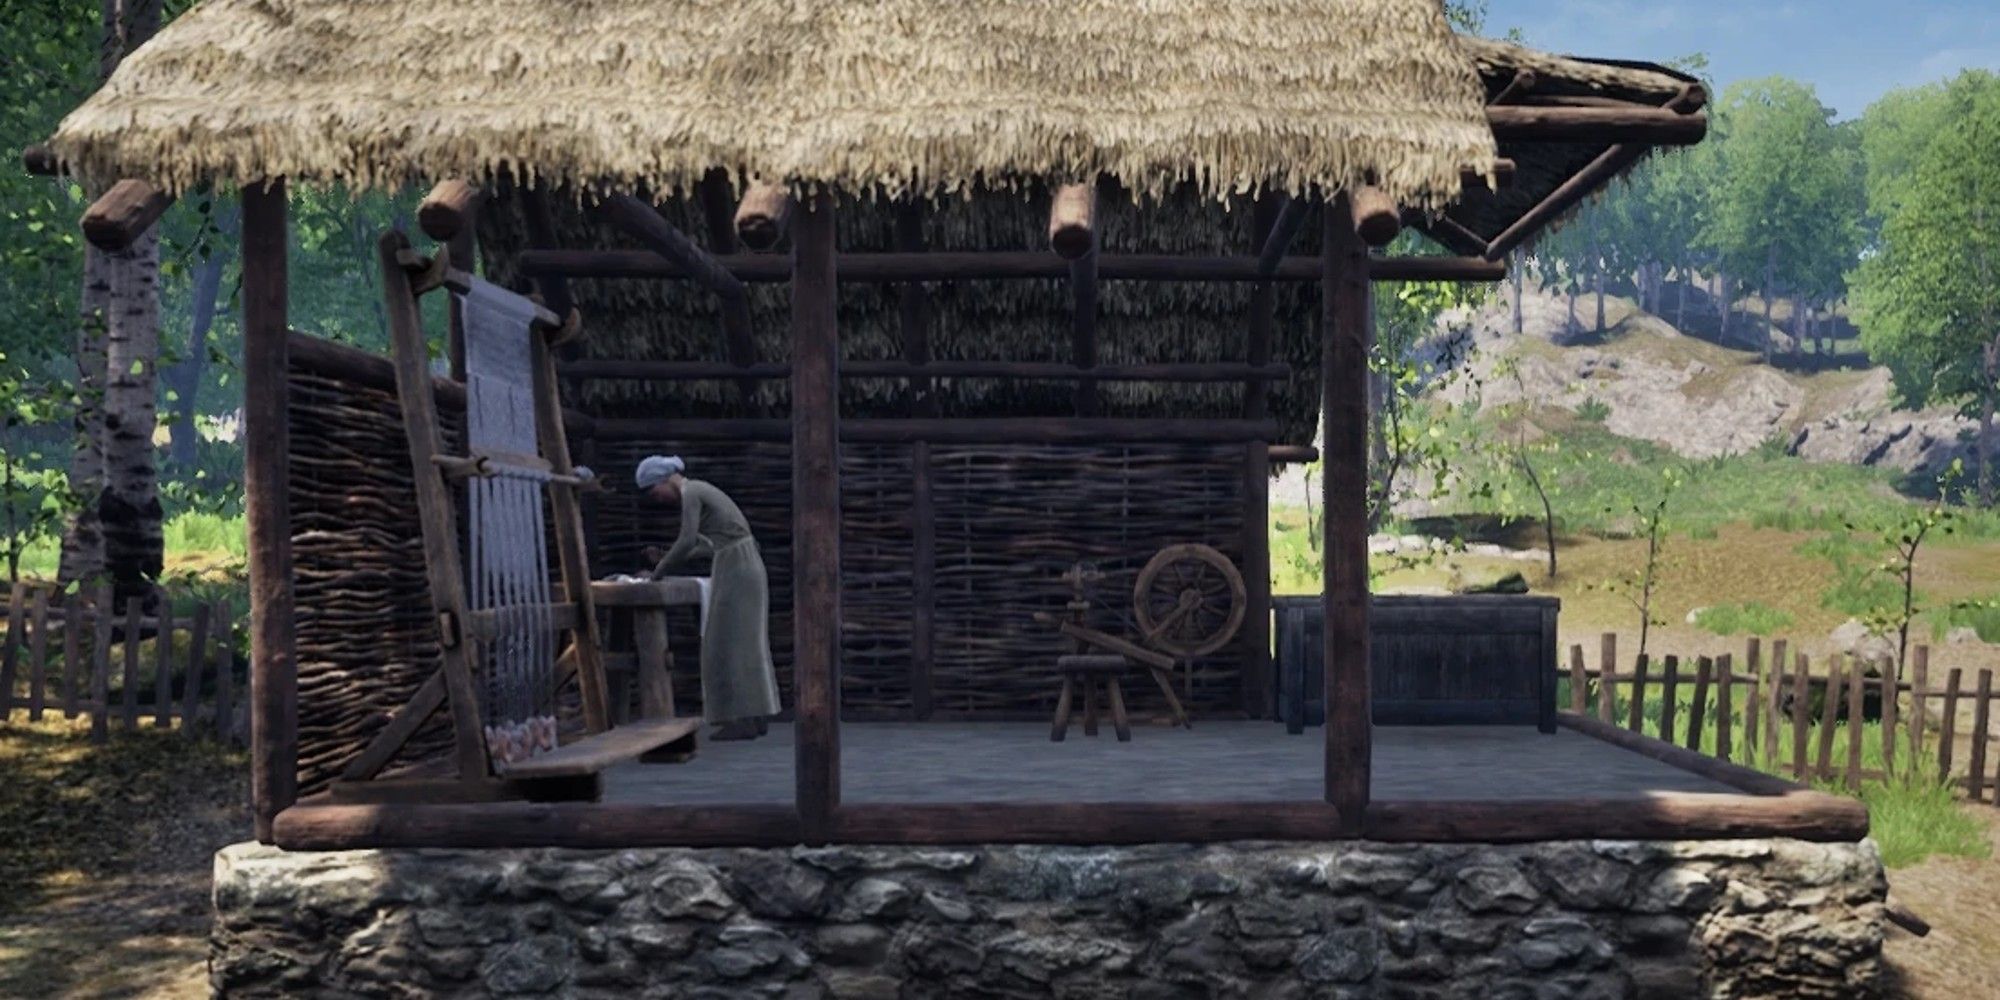 Villager working in a sewing hut